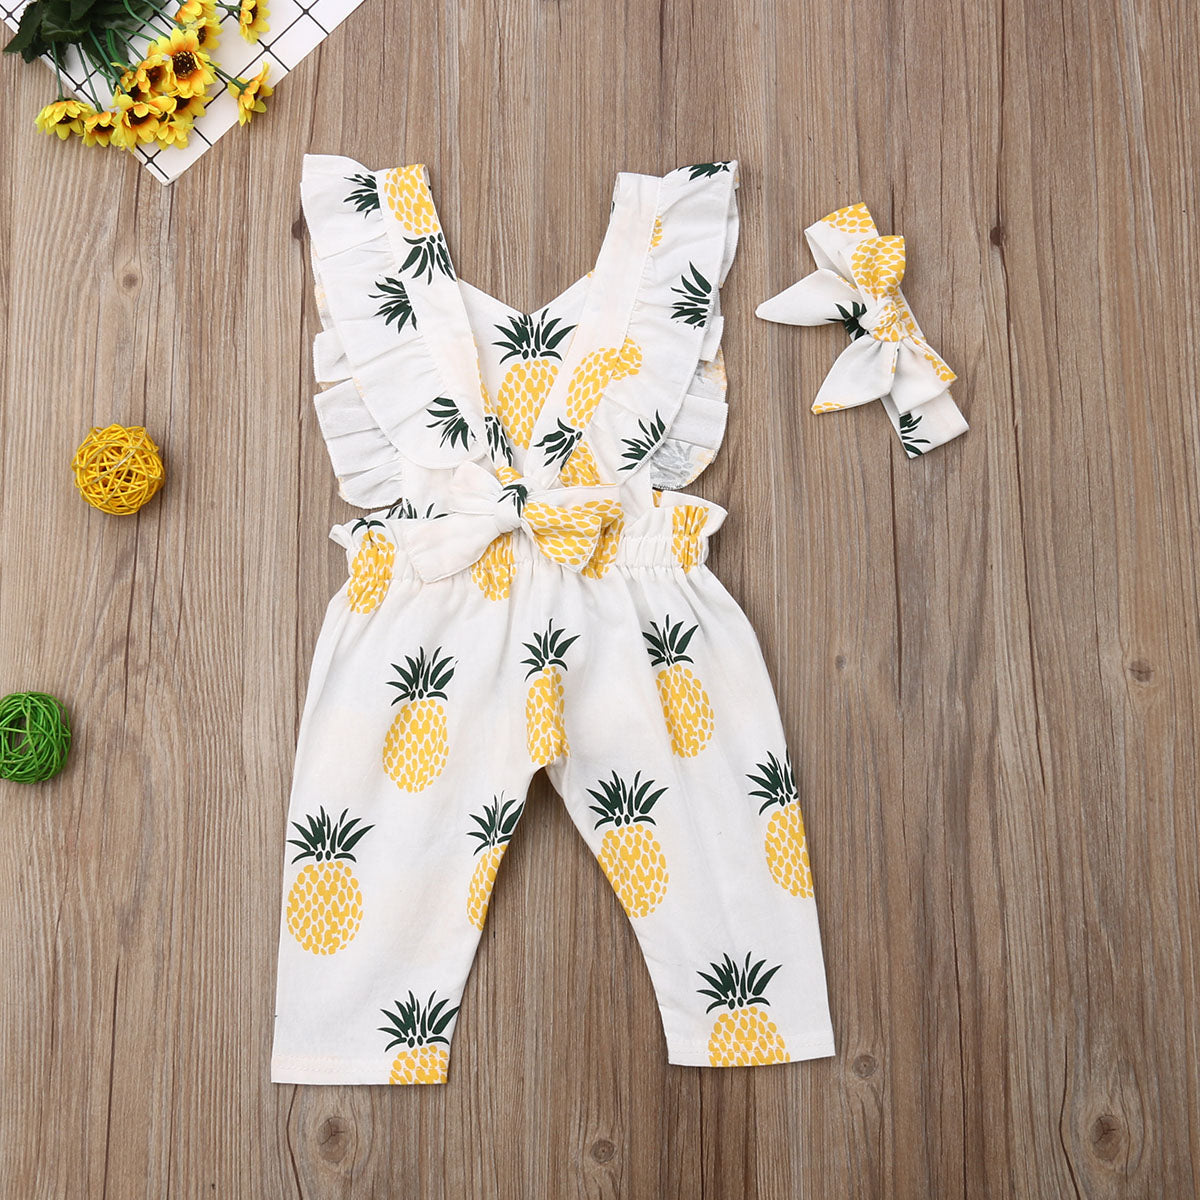 Emmababy Newborn Baby Girl Clothes Sleevless Ruffle Pineapple Print